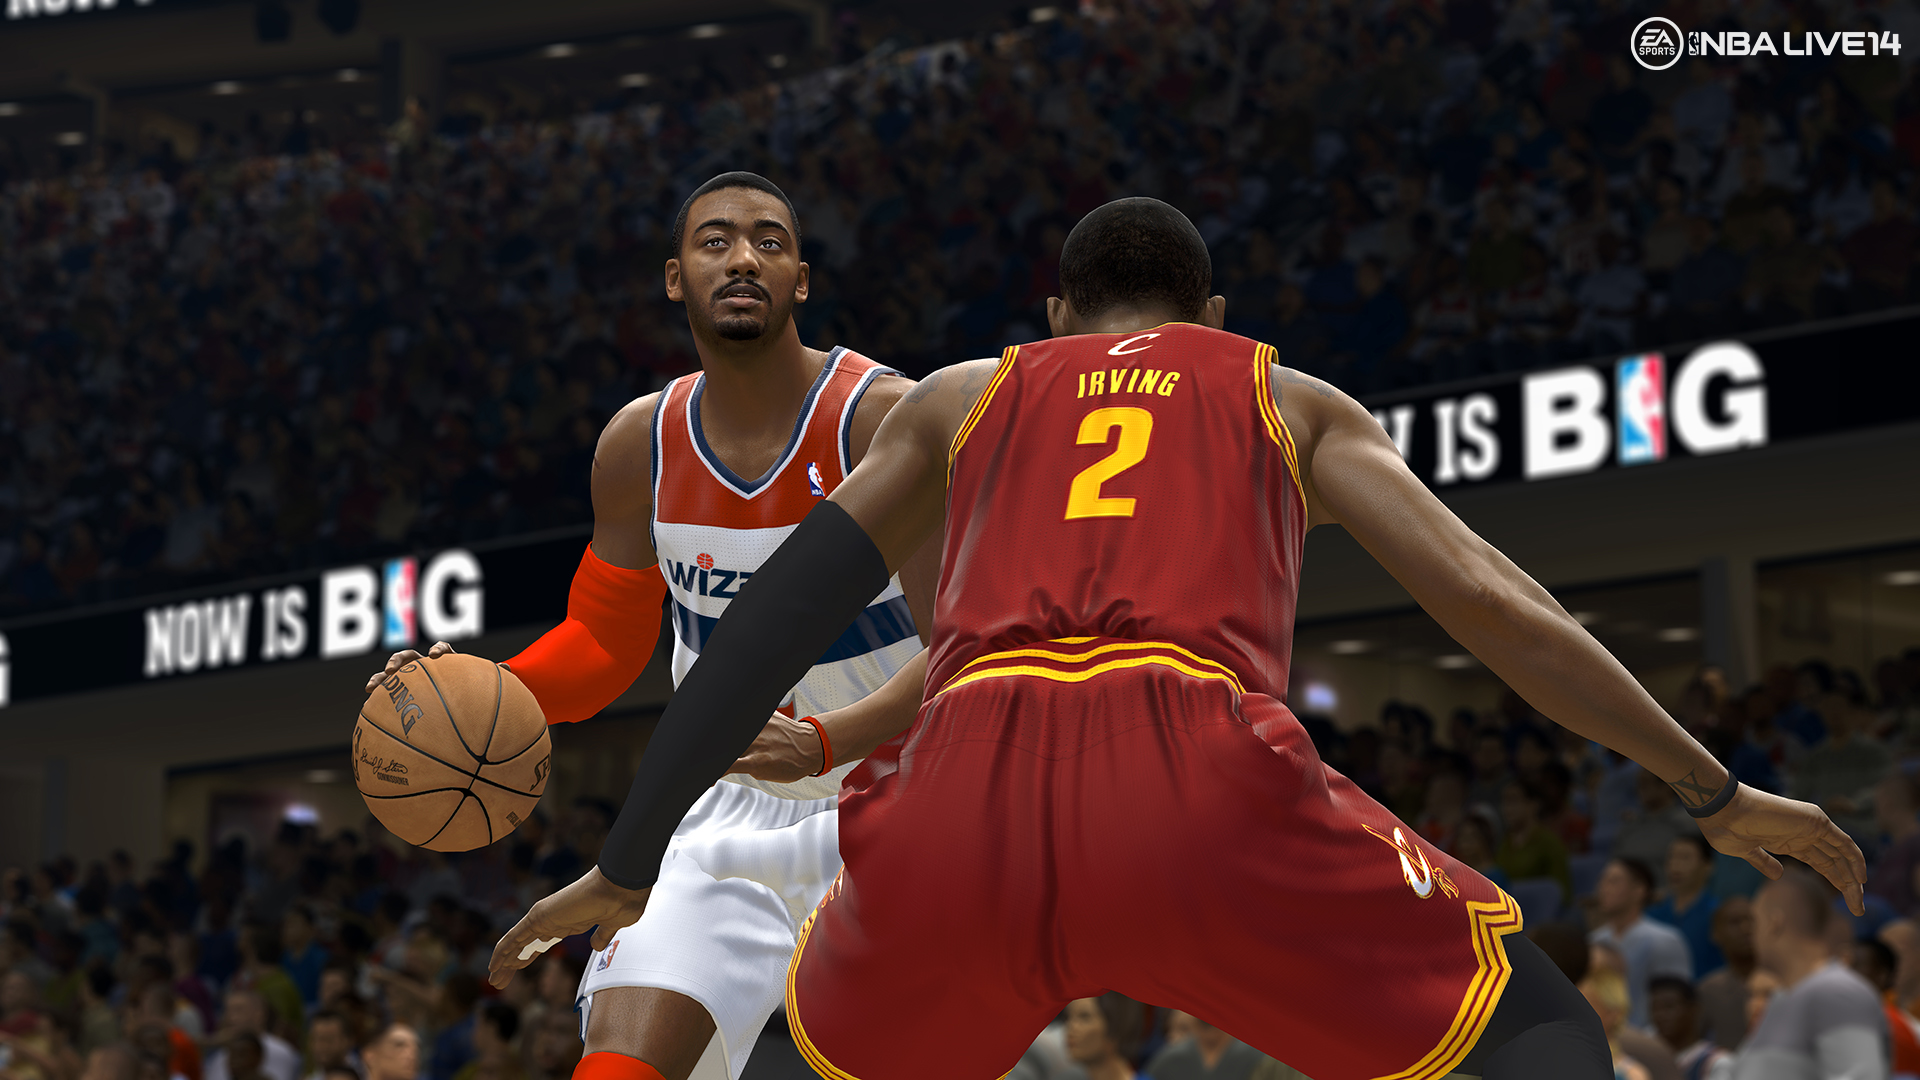 Nba Live 14 Xbox One Outlet, SAVE 50%